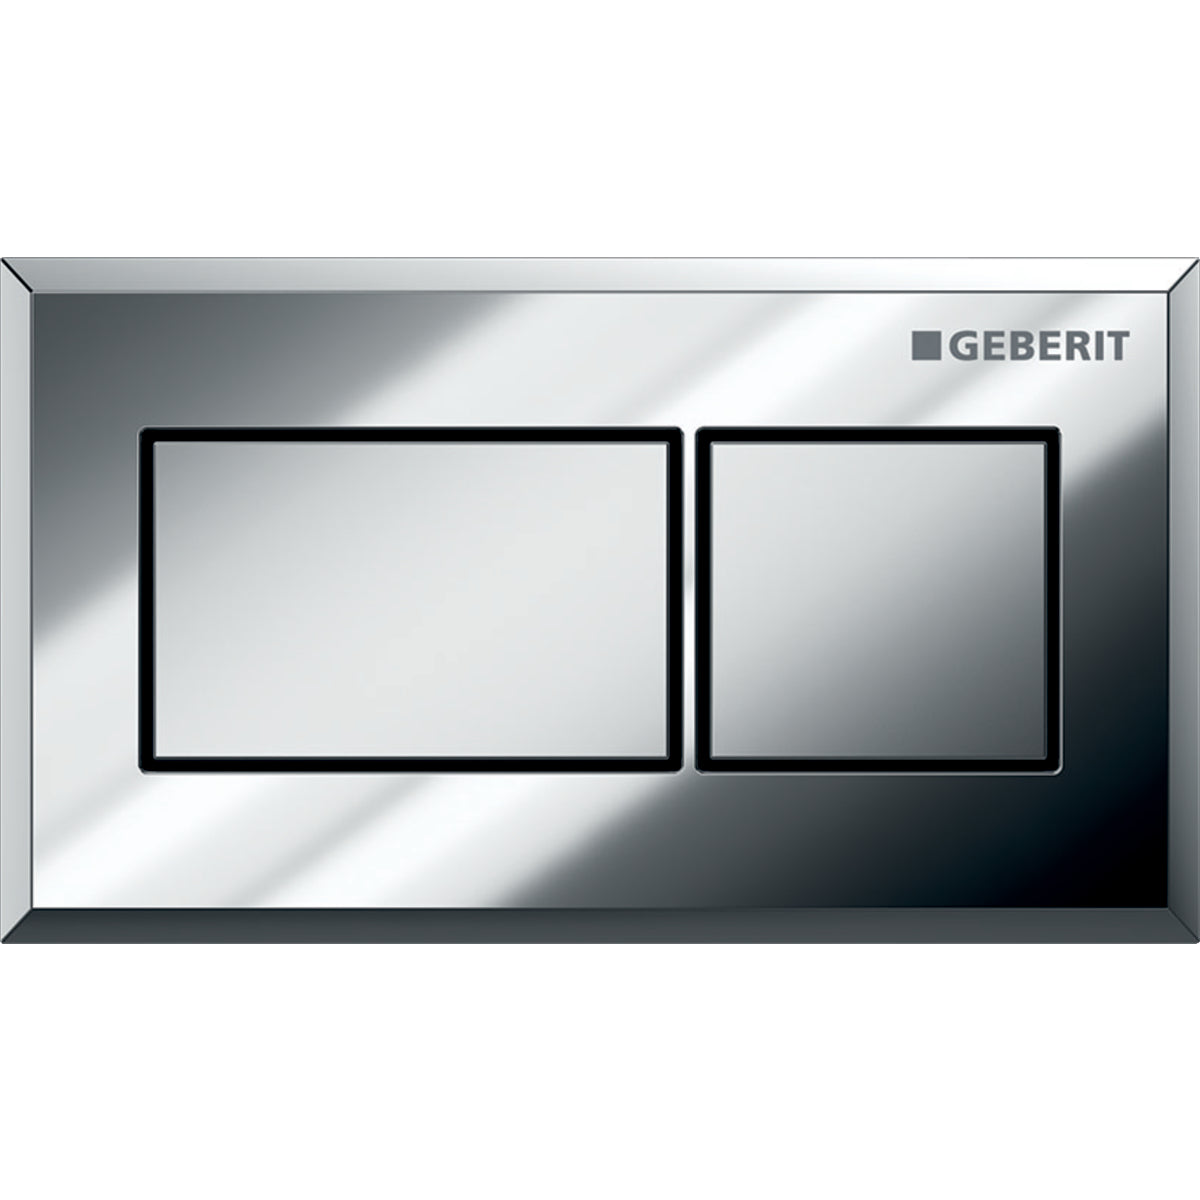 Geberit 116.053.KA.1- Geberit remote flush actuation, square design, pneumatic, for dual flush, for Sigma concealed cistern 8 cm, concealed actuator: bright chrome-plated, matt chrome-plated - FaucetExpress.ca